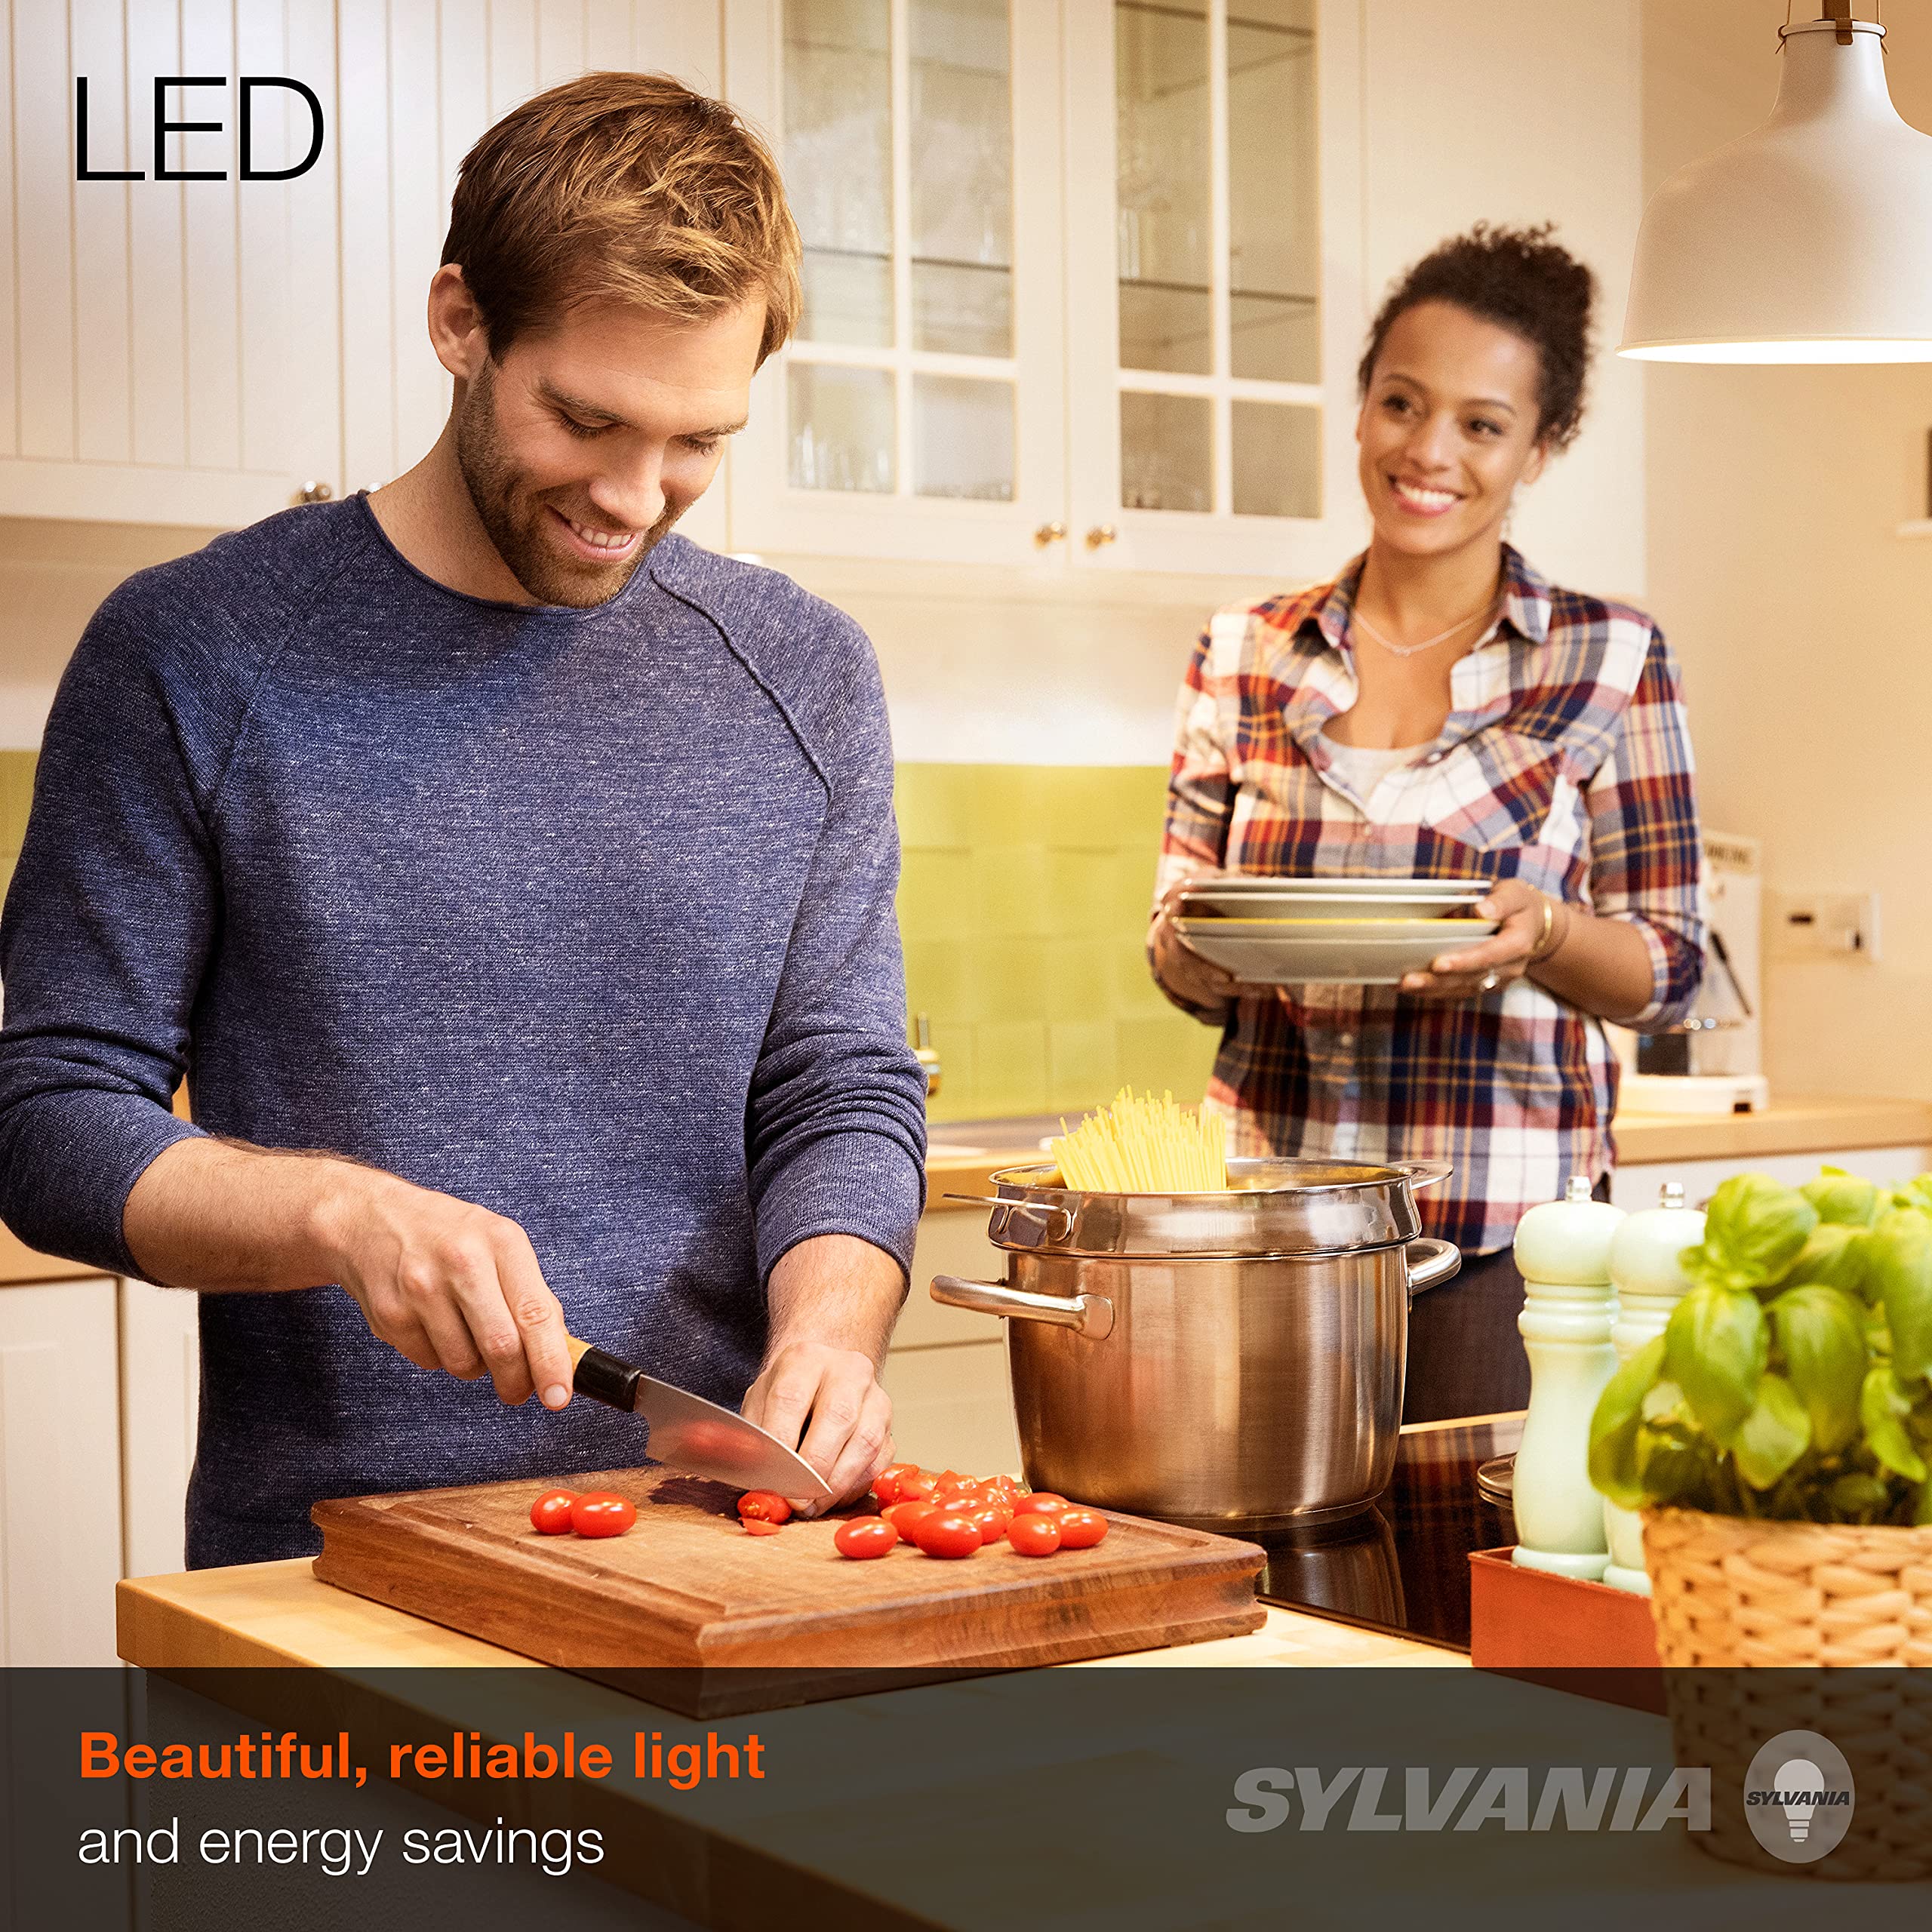 SYLVANIA ECO LED A19 Light Bulb, 100W Equivalent, Efficient 14.5W, 7 Year, 1450 Lumens, Non-Dimmable, Frosted, 2700K, Soft White - 6 Pack (40885)